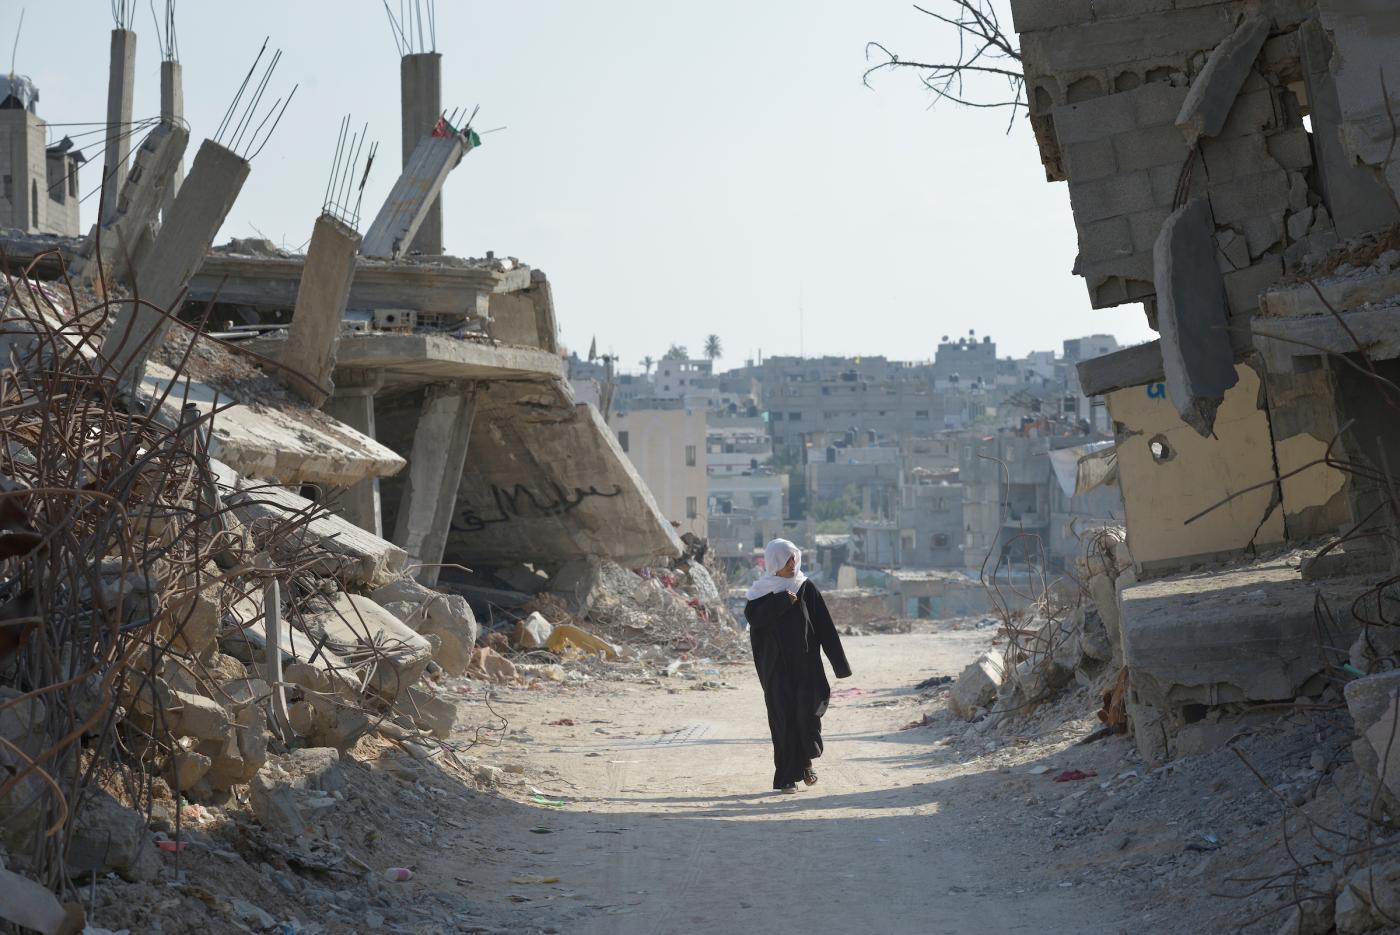 A woman walks through Shejaiya, a Gaza neighborhood which bore the brunt of some of the most intense Israeli air attacks during the 2014 war. Throughout Gaza, members of the ACT Alliance are supporting health care, vocational training, rehabilitation of housing and water systems, psycho-social care, and a variety of other humanitarian activities.